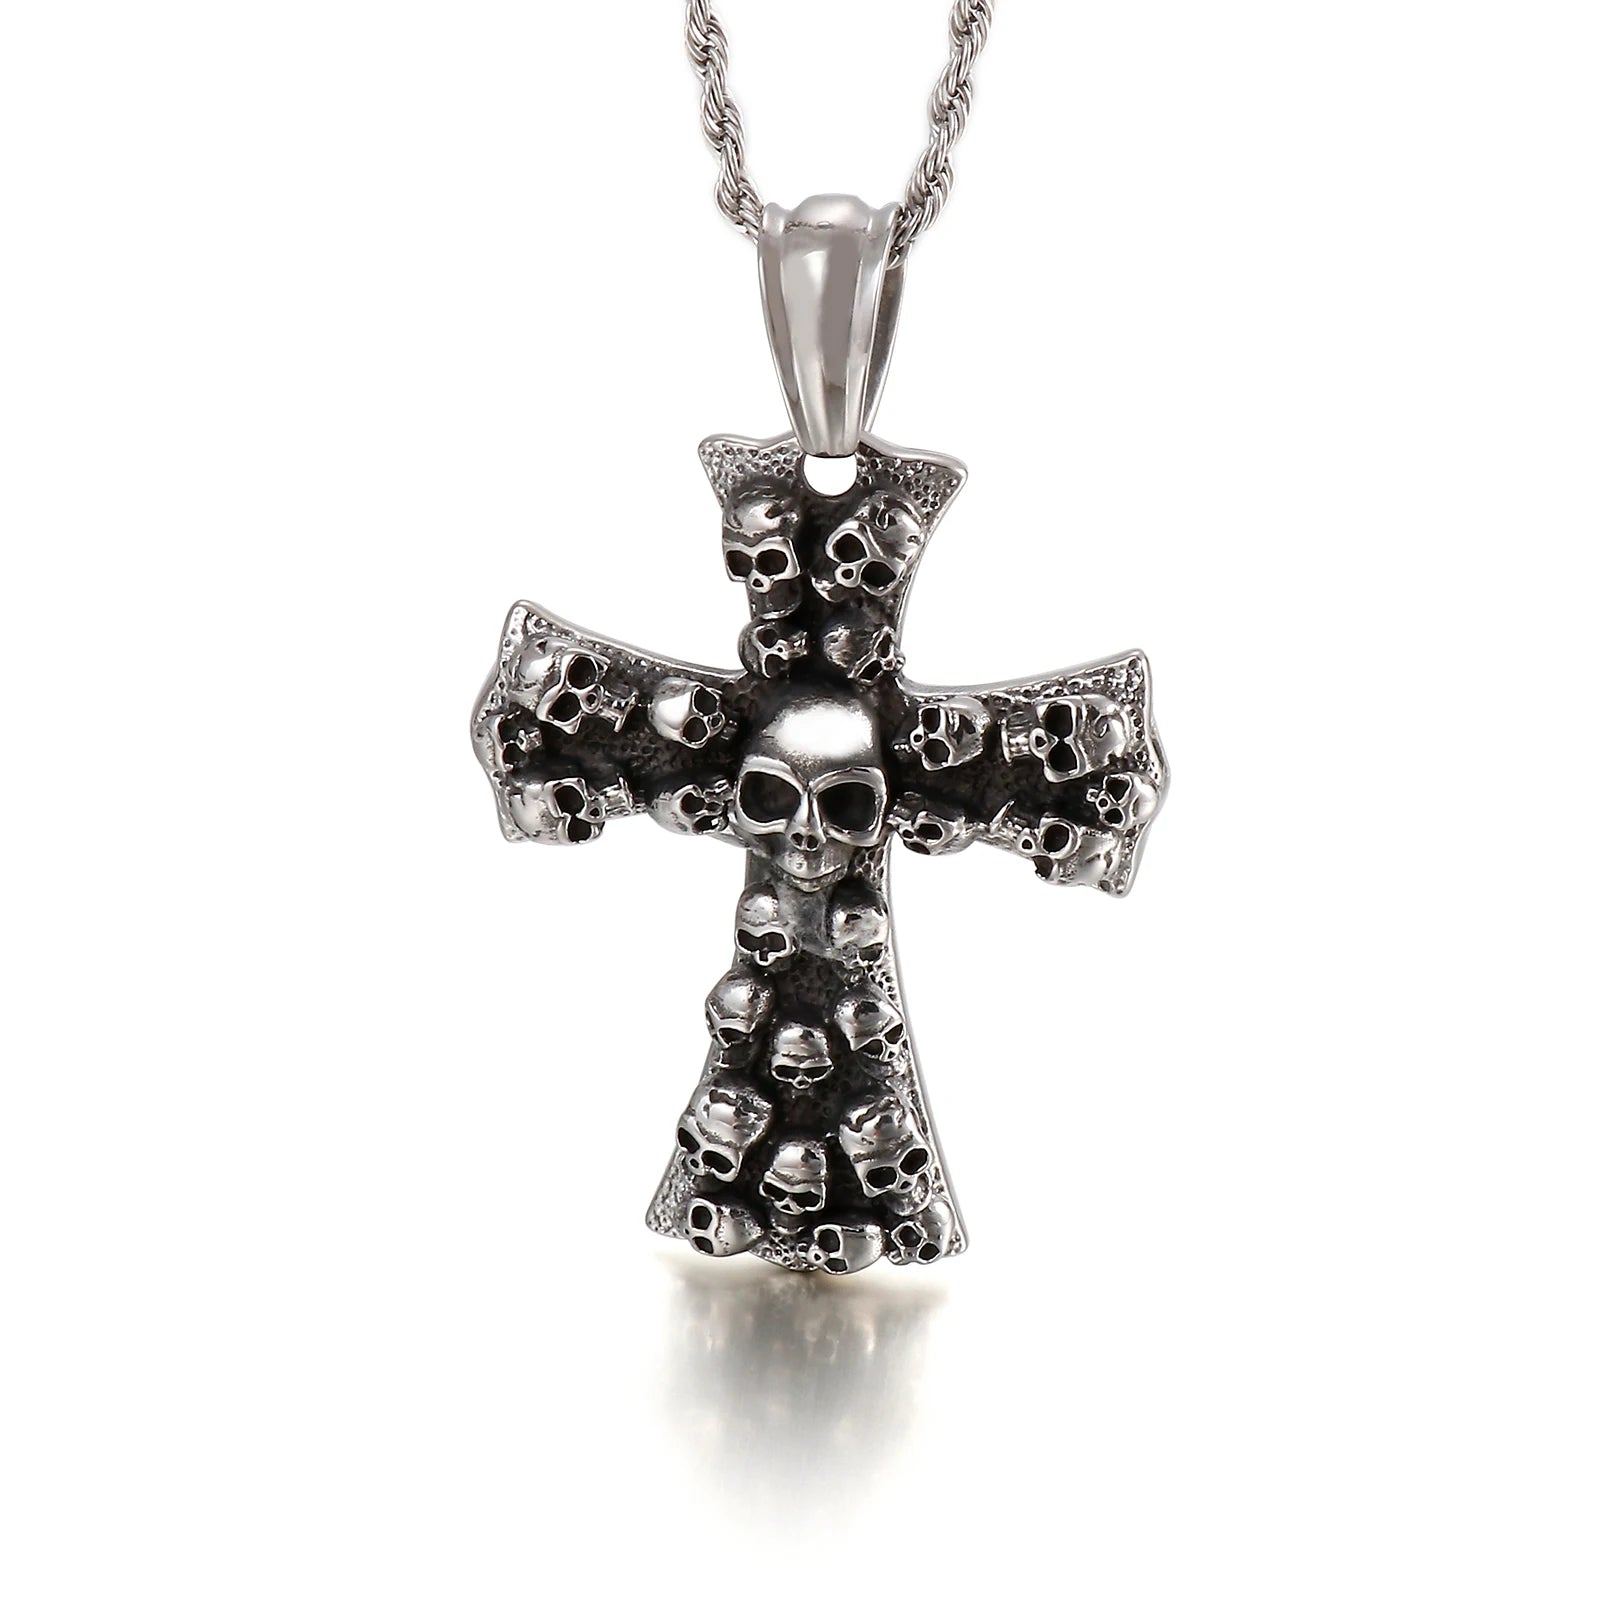 Huge Evil Cross Ghost Head Pendant Necklace - Men's Stainless Steel Jewelry. Badass skull pendant for men. Badass gifts for him. Badass gifts for badass. Badass birthday gifts. Badass Christmas gifts for badasses. Badass biker skull pendant. Badass biker skull jewelry. Badass skull jewelry. Badass skull accessories. Valentine gifts for him. Anniversary gift for him. Anniversary gift for my badass husband. Badass Birthday gift for my badass boyfriend. Badass Birthday gift for my badass husband.